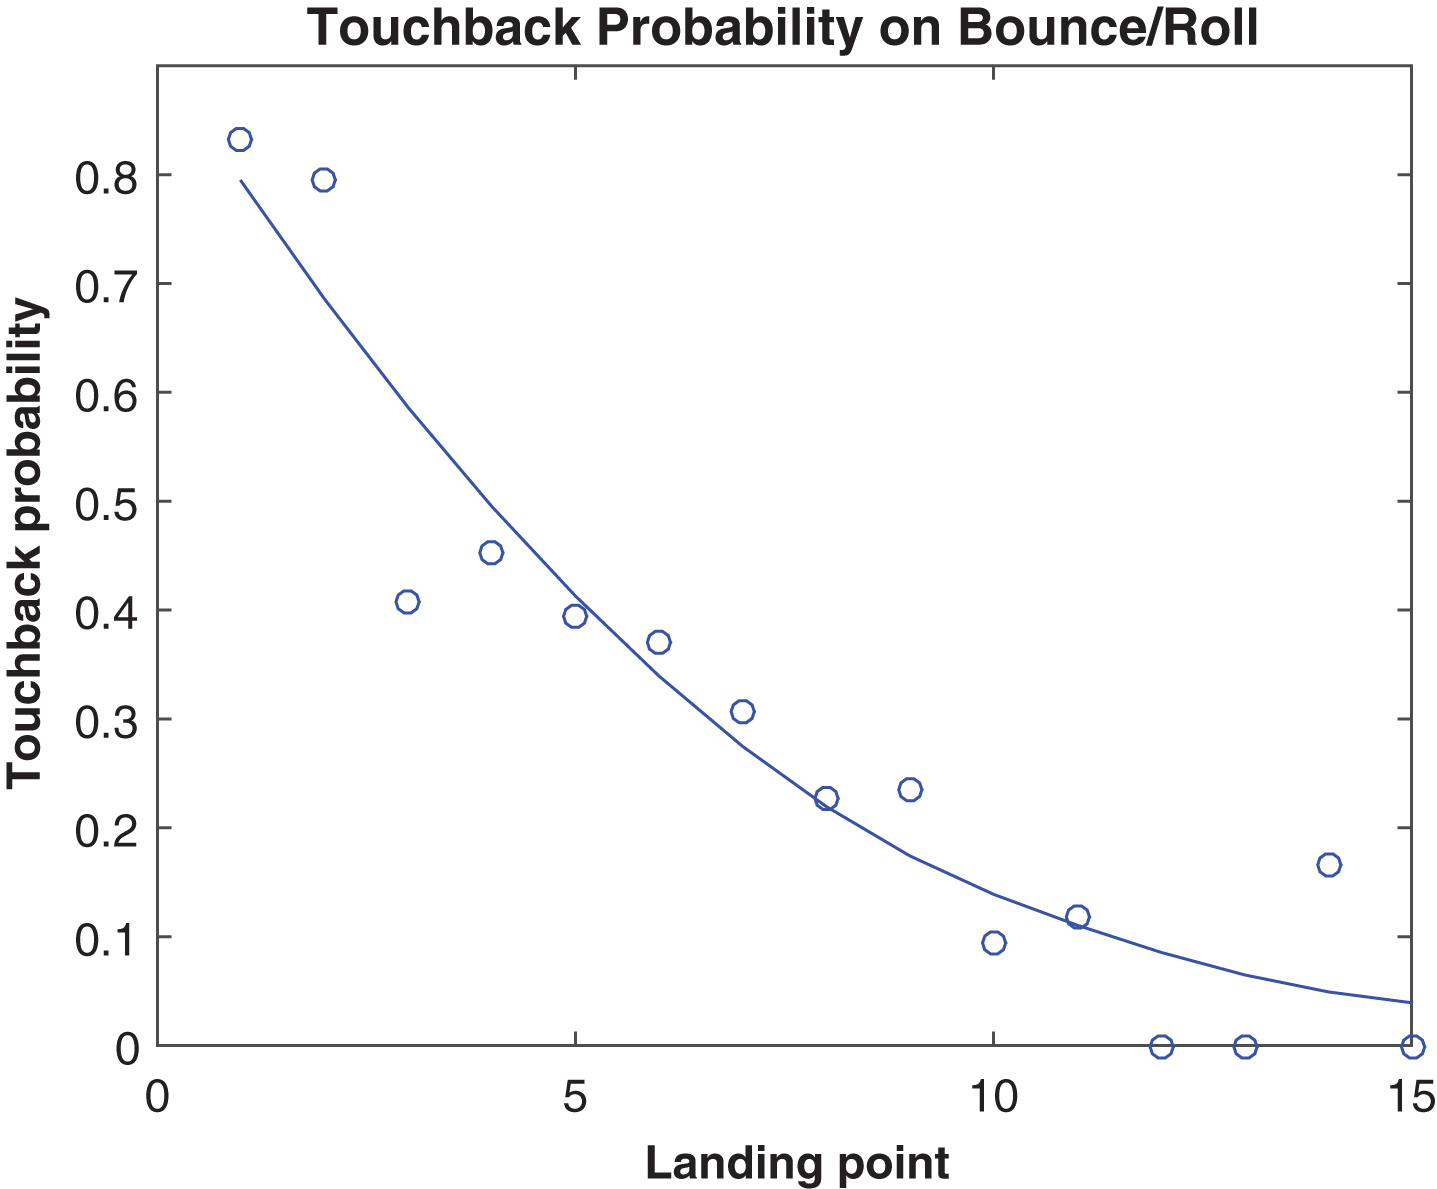 Touchback probability by landing point, 2013.